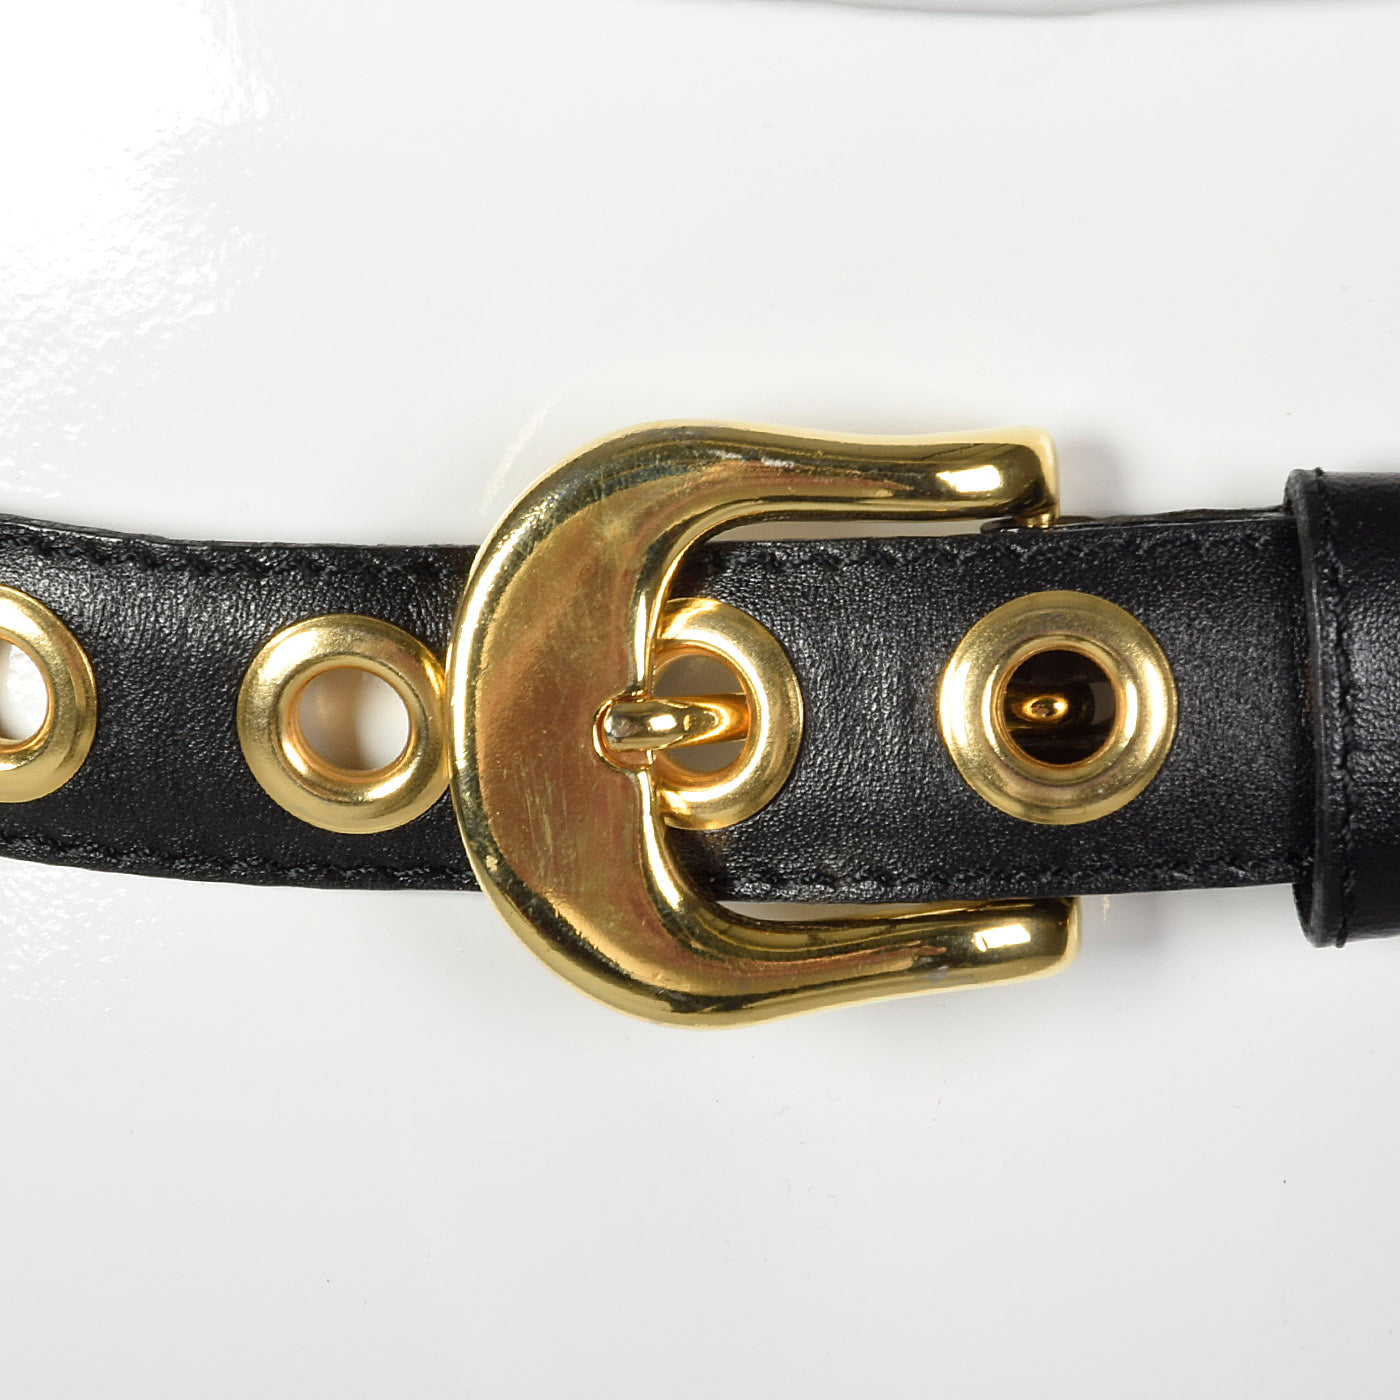 1990s Yves Saint Laurent Black Belt with Gold Rings – Style & Salvage